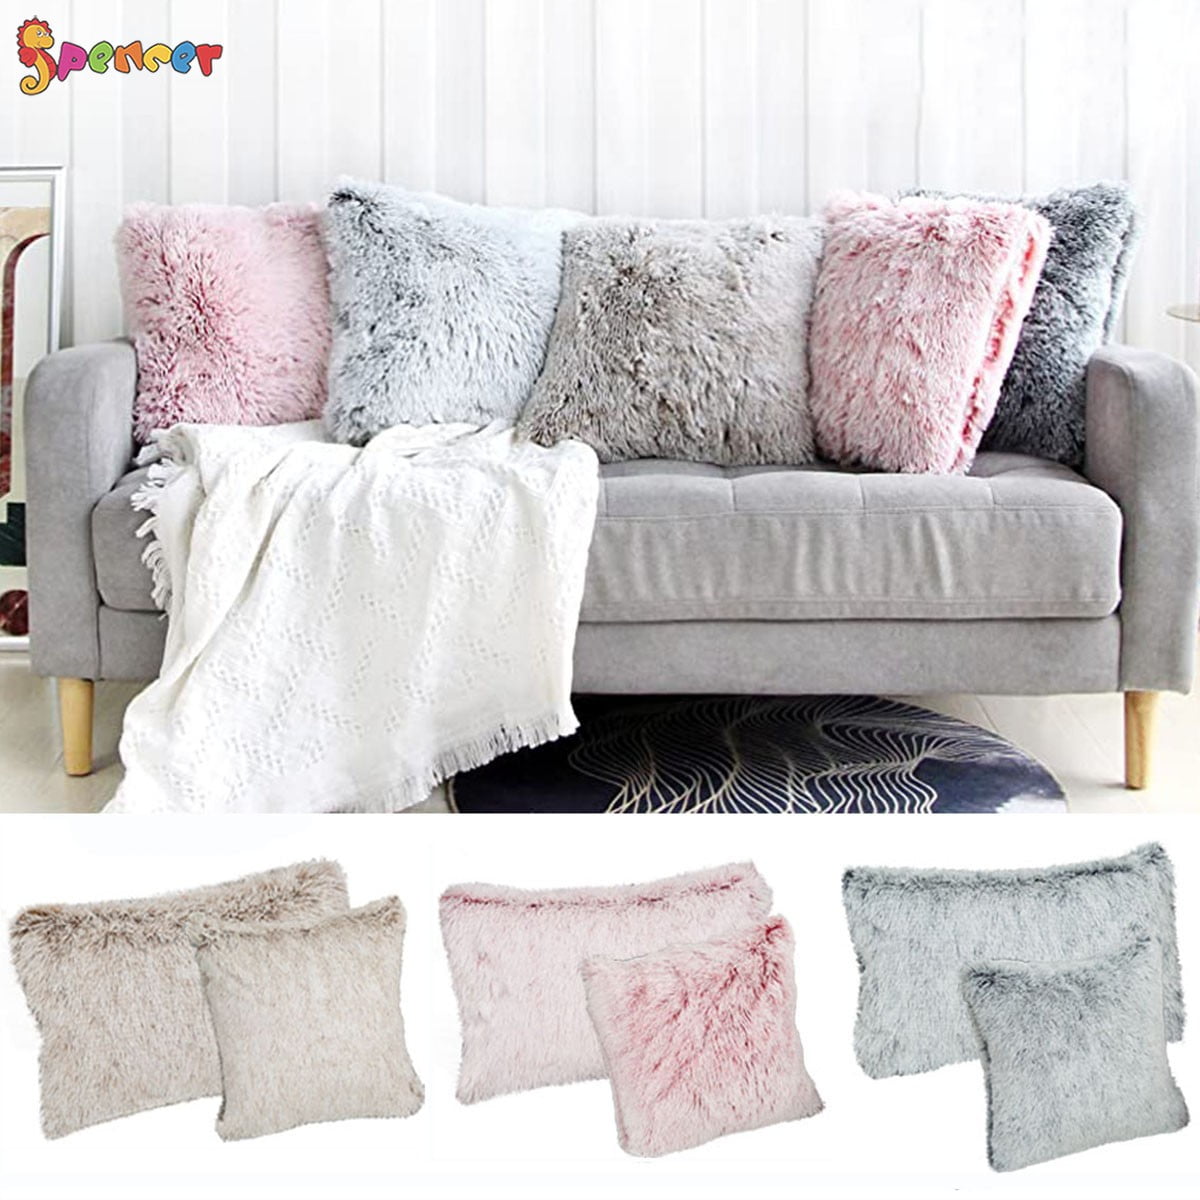 2X Luxury Cushion Covers Velvet Throw Pillow Cases Cover Sofa Bed Chair Decor 